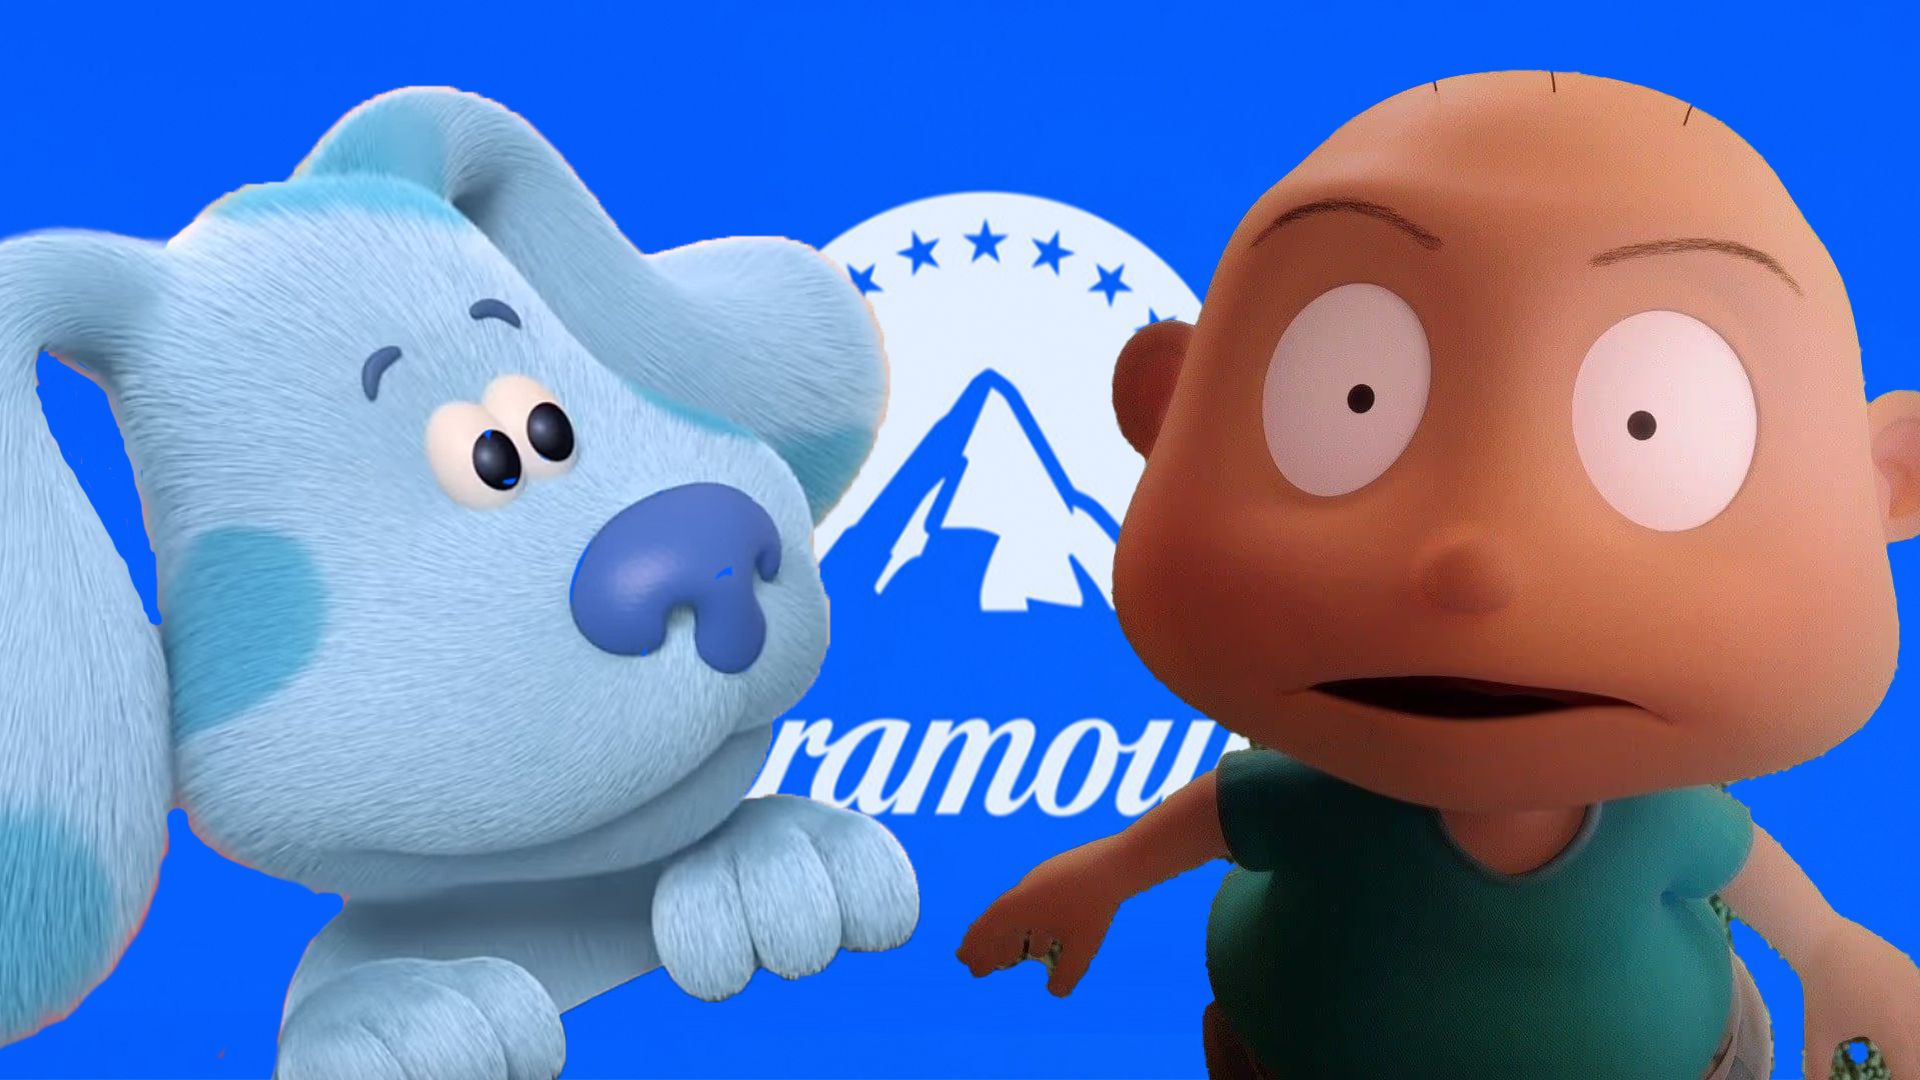 Tommy from Rugrats and Blue from Blue's Clues against Paramount+ logo